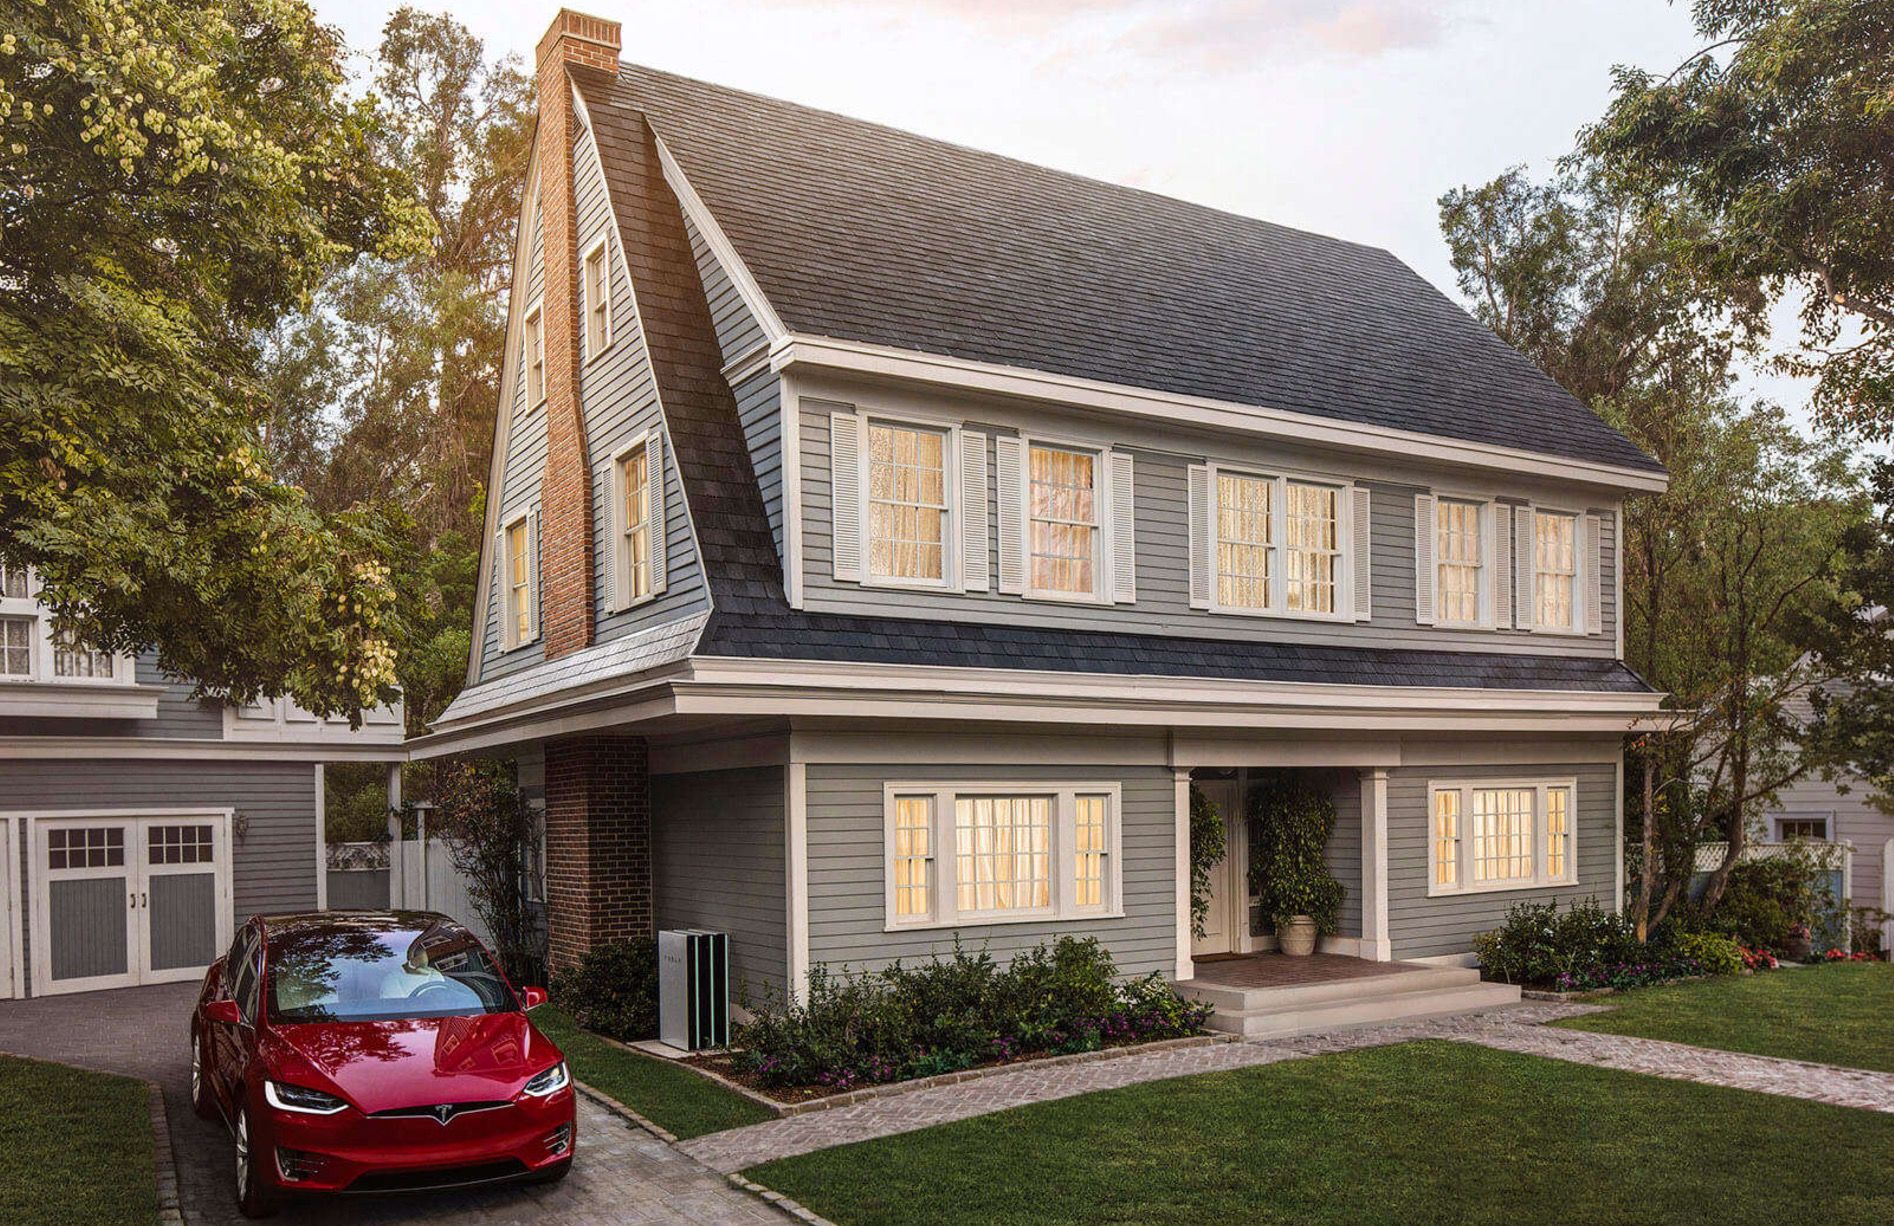 tesla solar roof everything you need to know image 1